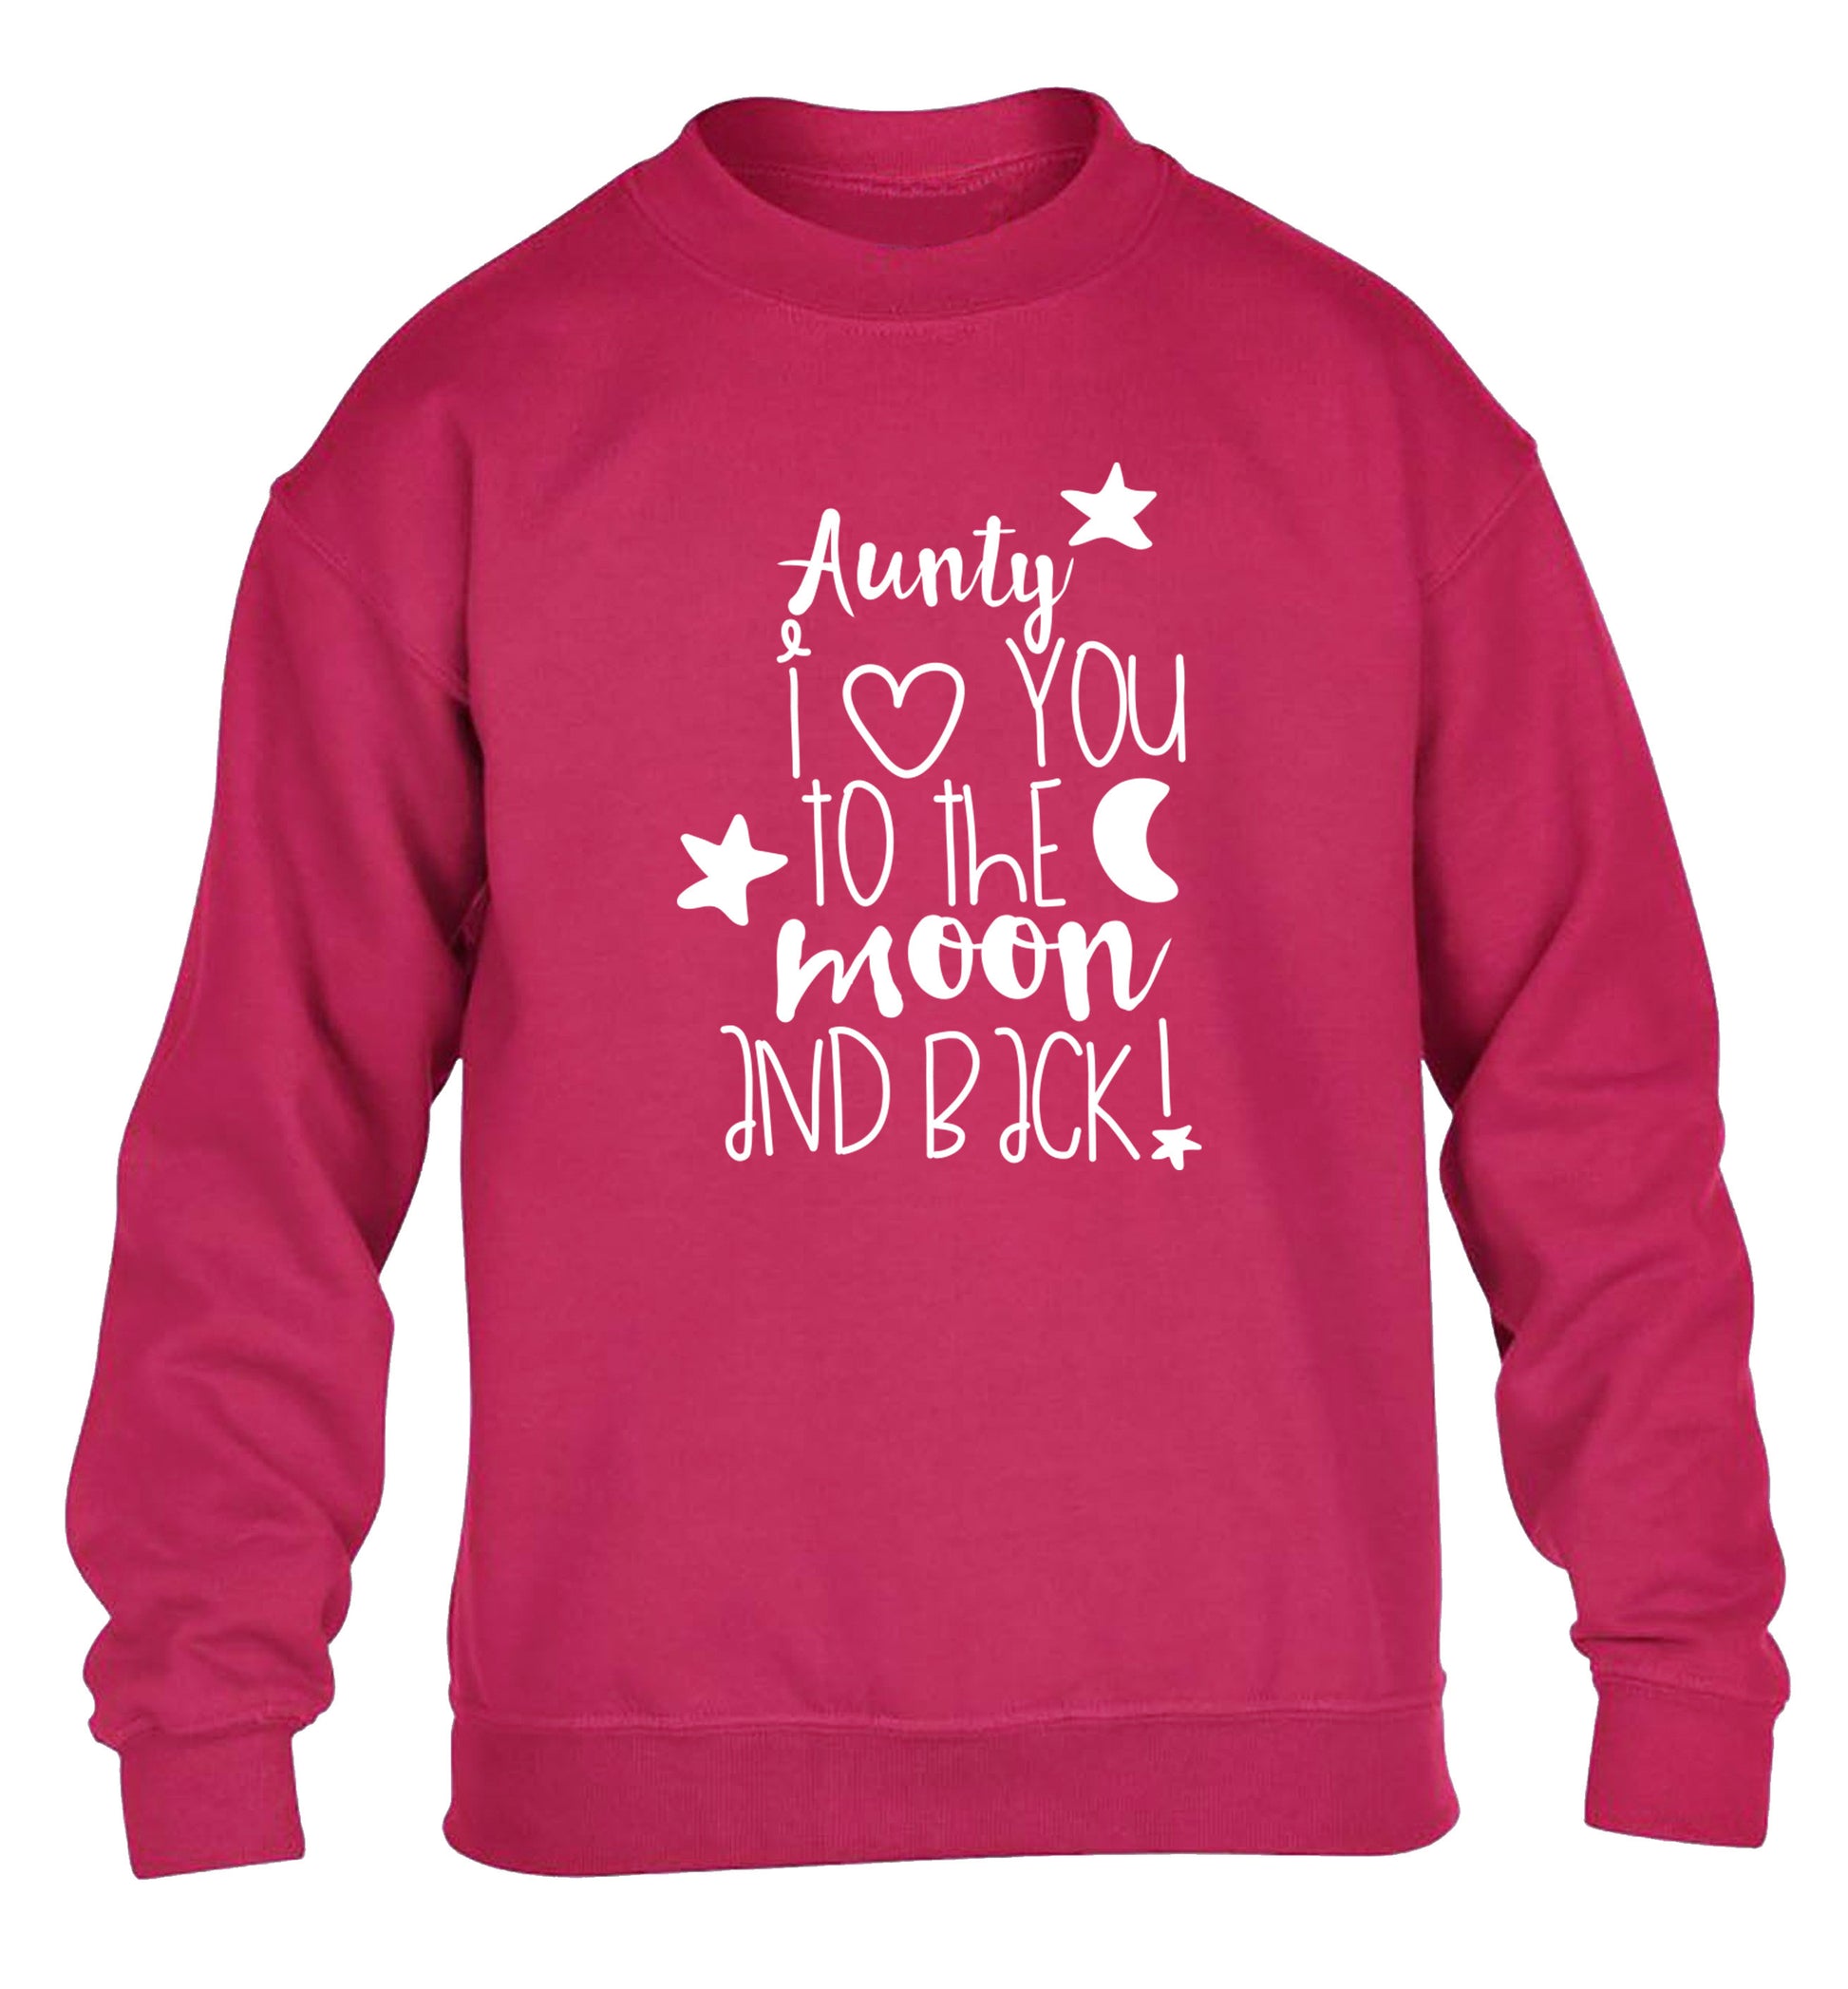 Aunty I love you to the moon and back children's pink  sweater 12-14 Years